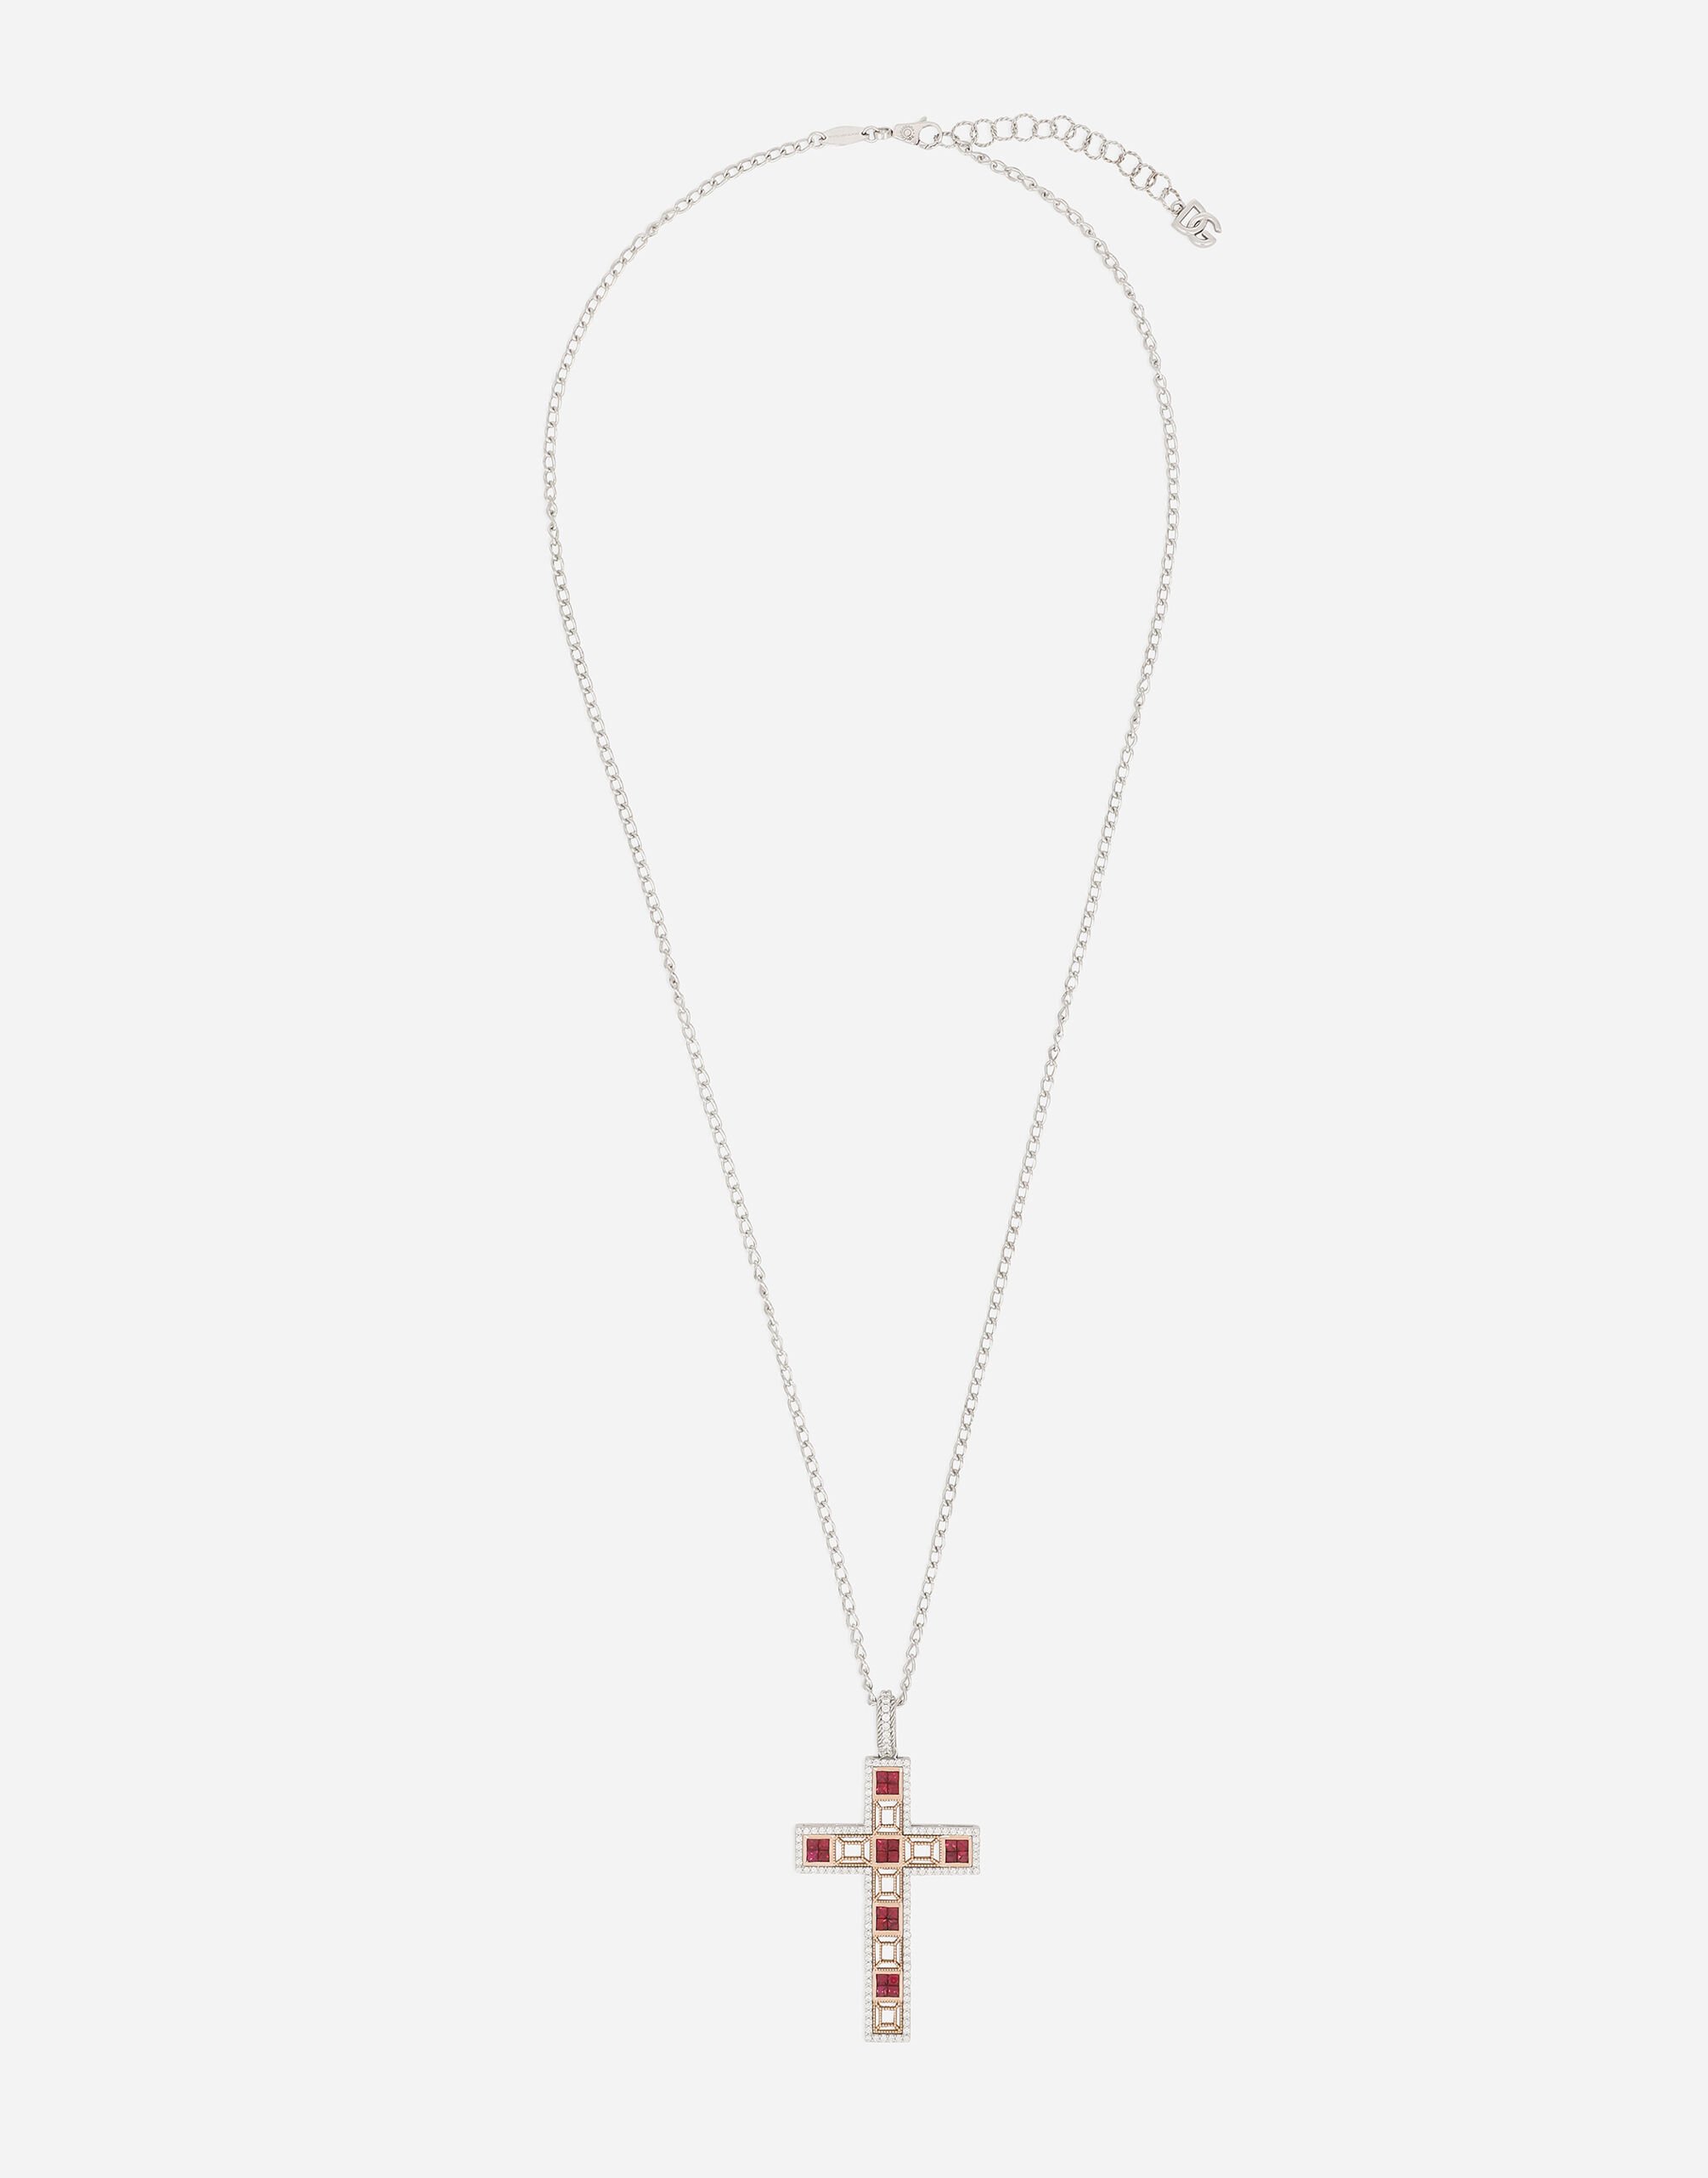 ${brand} Tradition pendant in pink and white gold 18kt with rubies diamonds ${colorDescription} ${masterID}